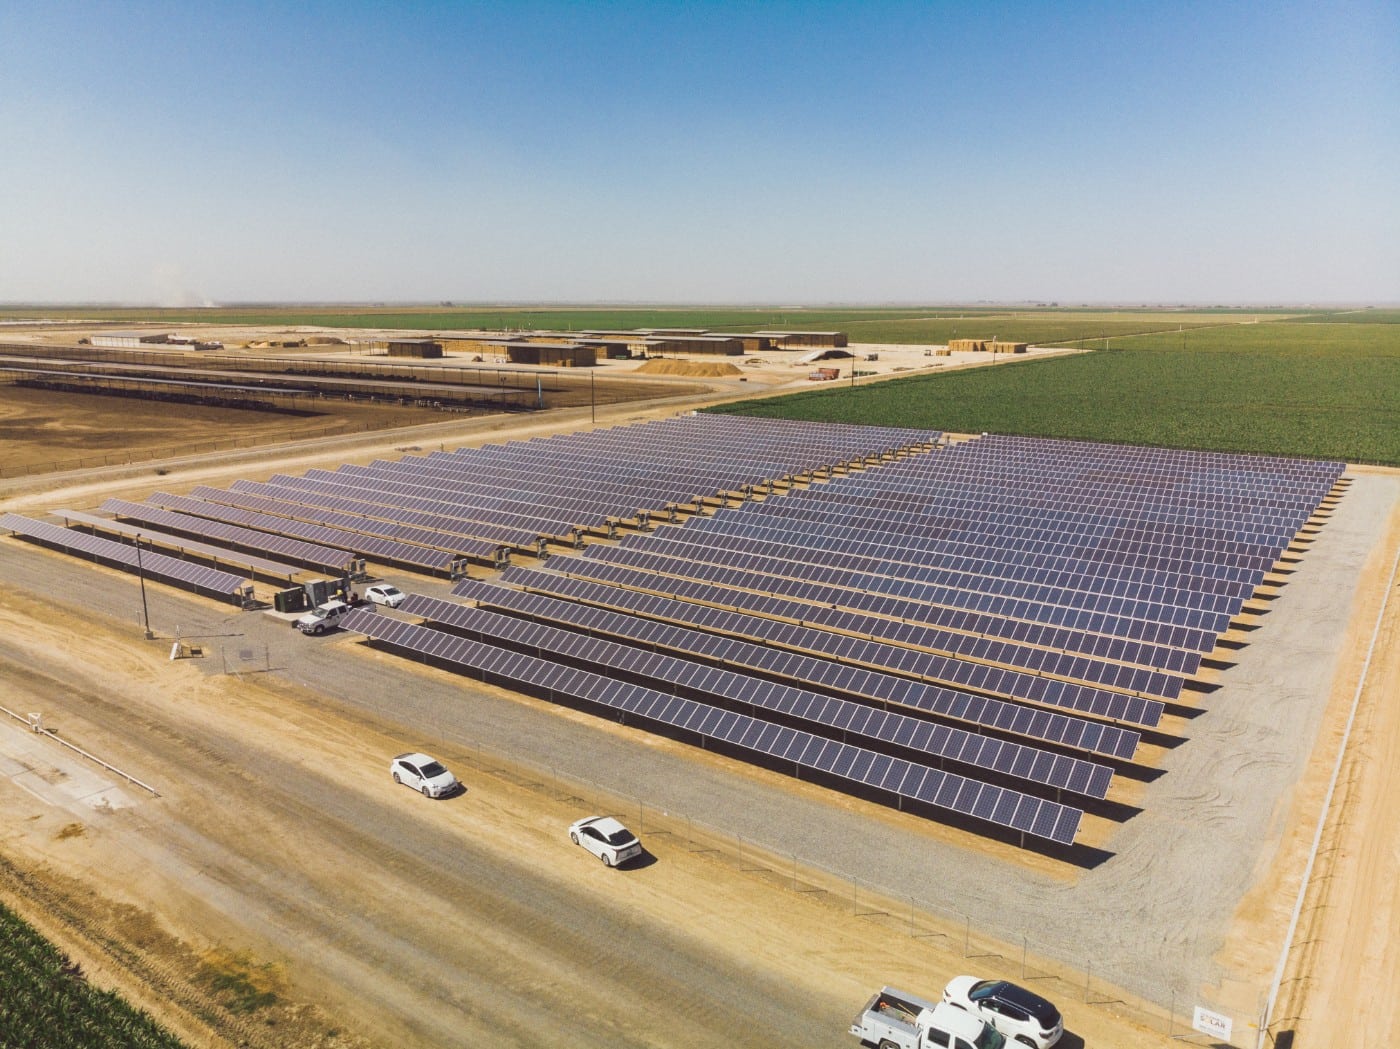 Aerial view of large ground-mounted solar panel installation at John Scheenstra Dairy surrounded by livestock pens, hay bales and green pastures in Wasco, California.